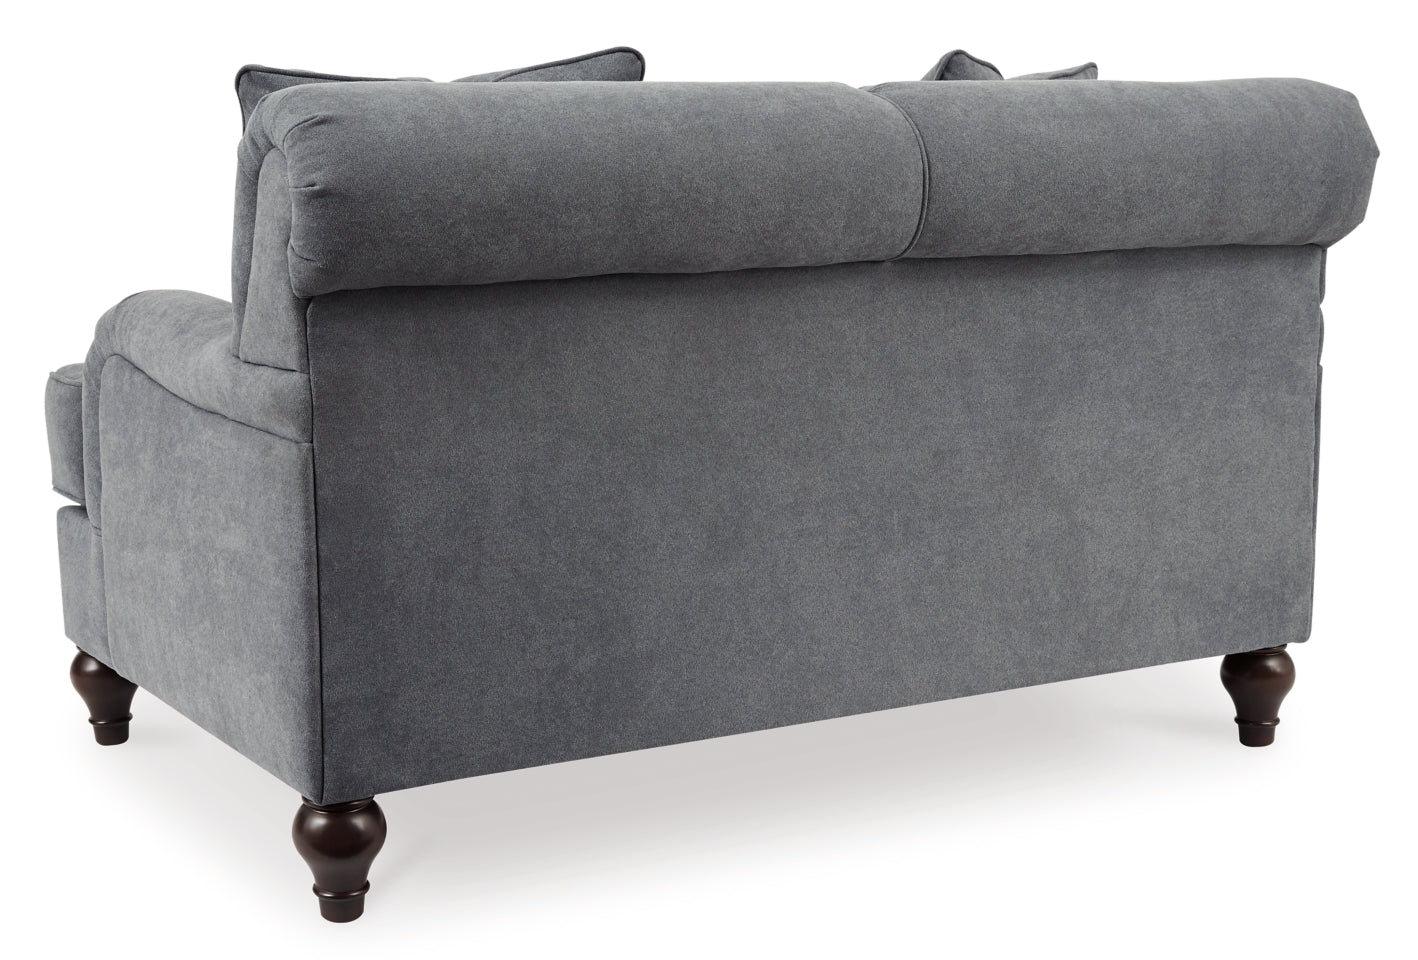 Renly Sofa and Loveseat - furniture place usa